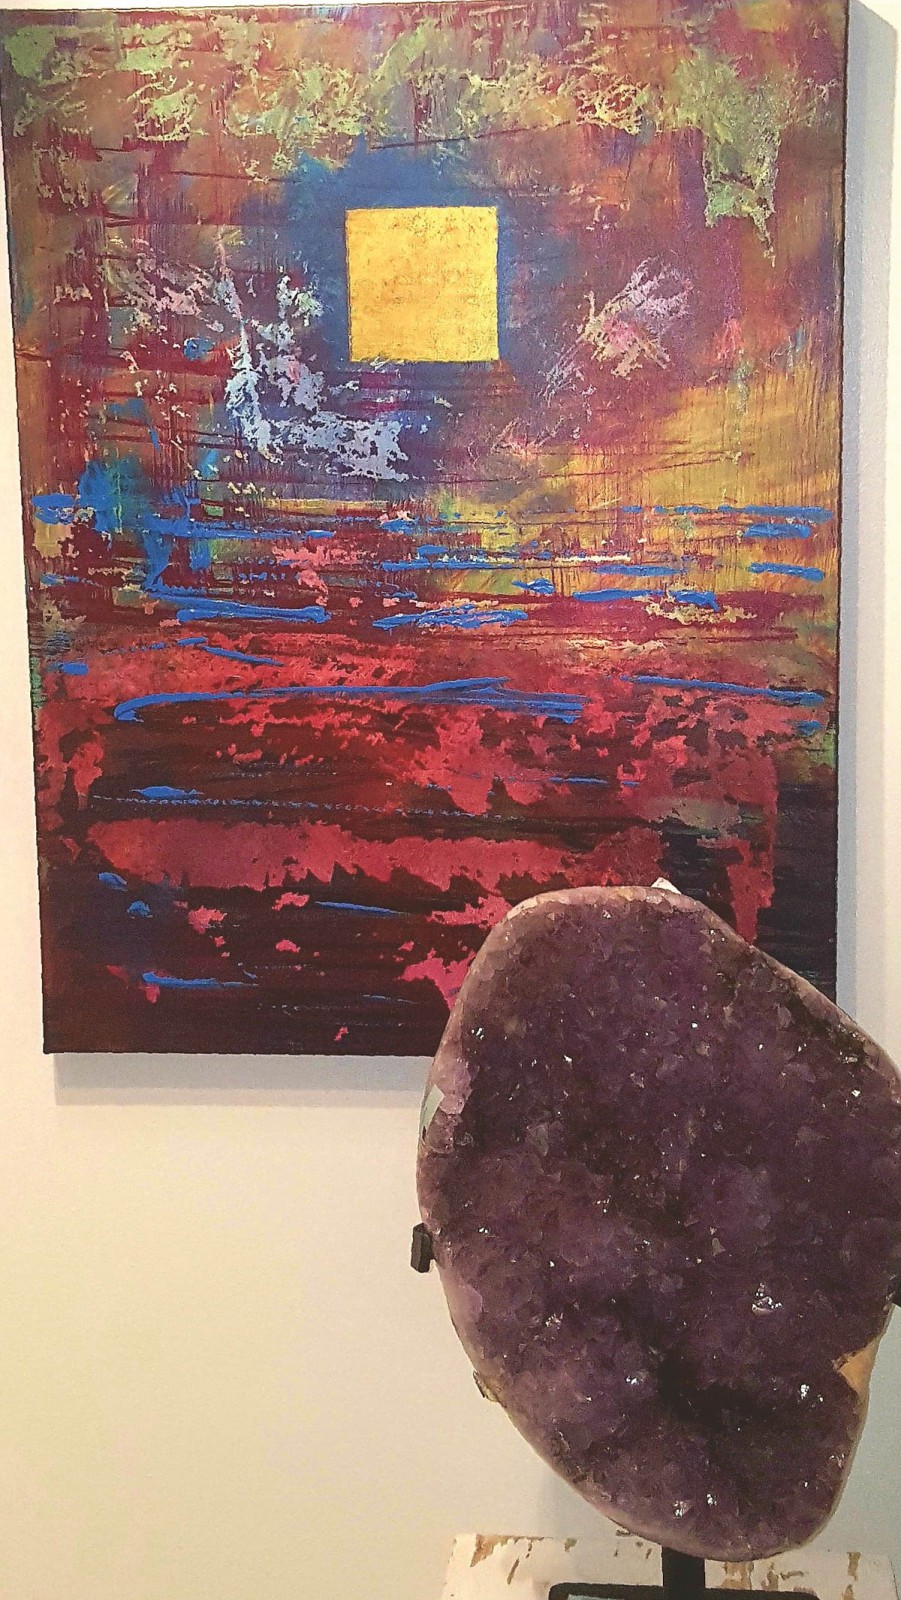 Convergence with Amethyst. Bill Bowers, artist